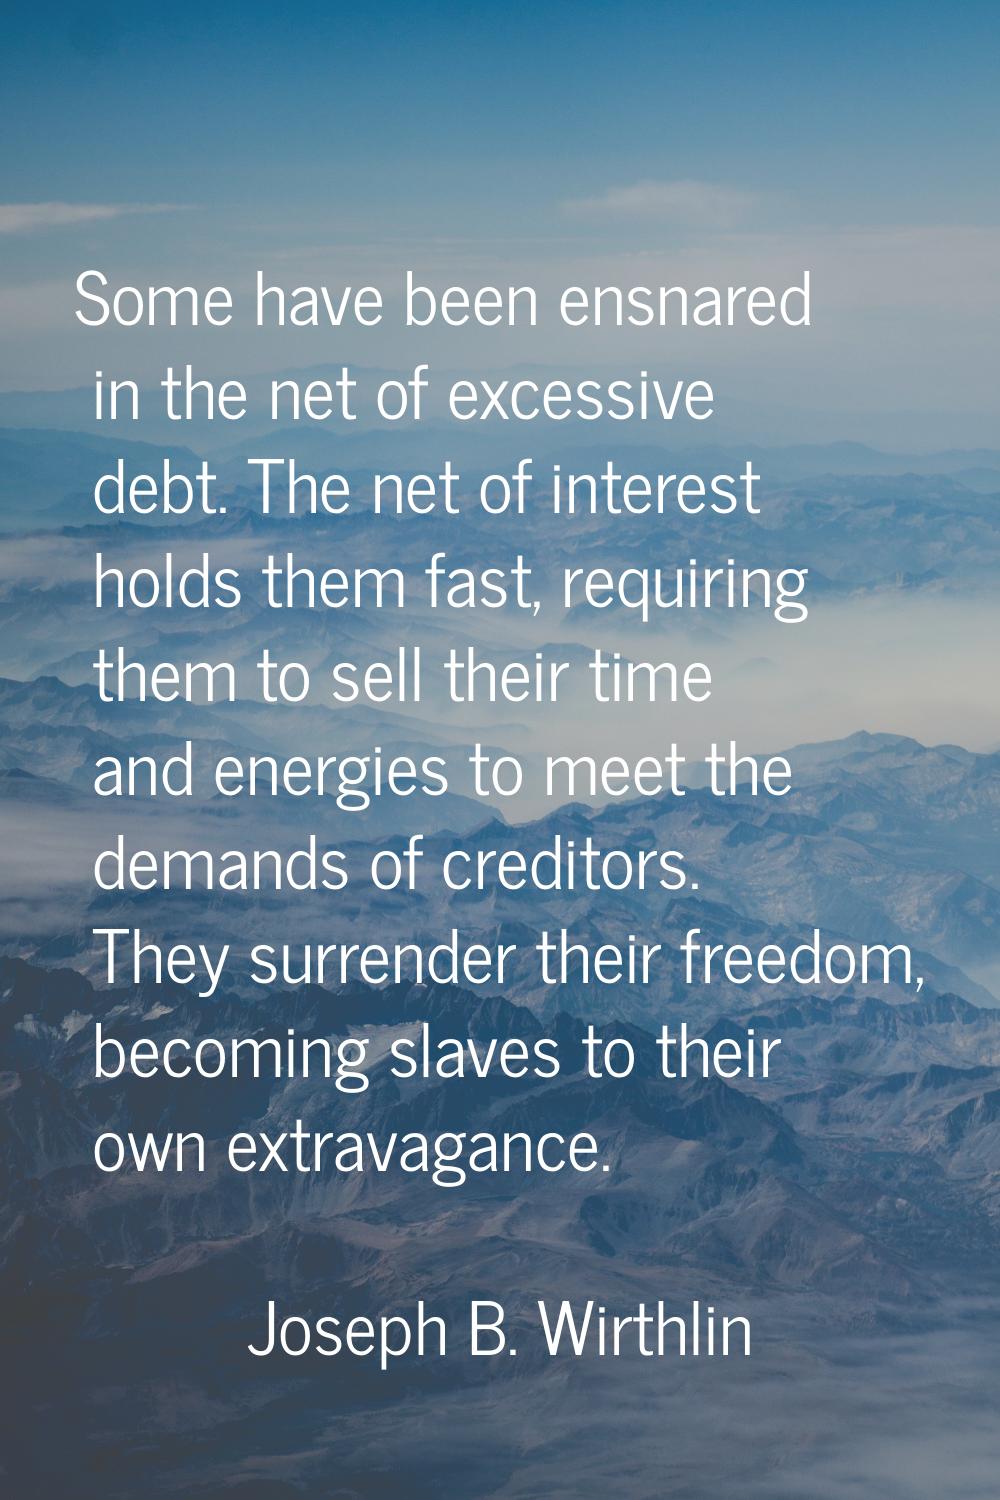 Some have been ensnared in the net of excessive debt. The net of interest holds them fast, requirin